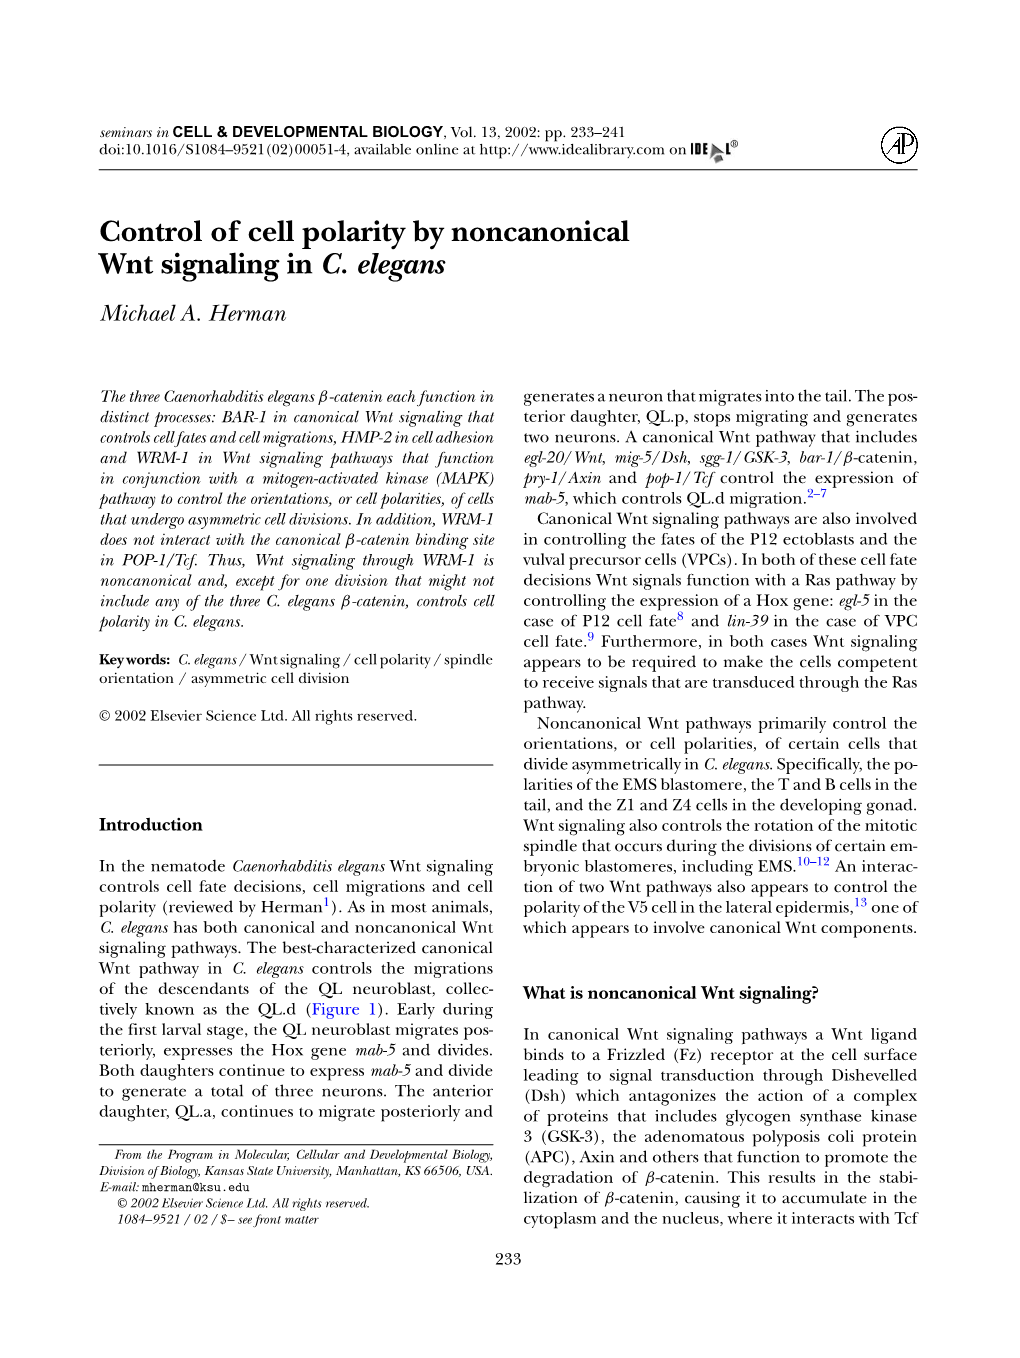 Control of Cell Polarity by Noncanonical Wnt Signaling in C